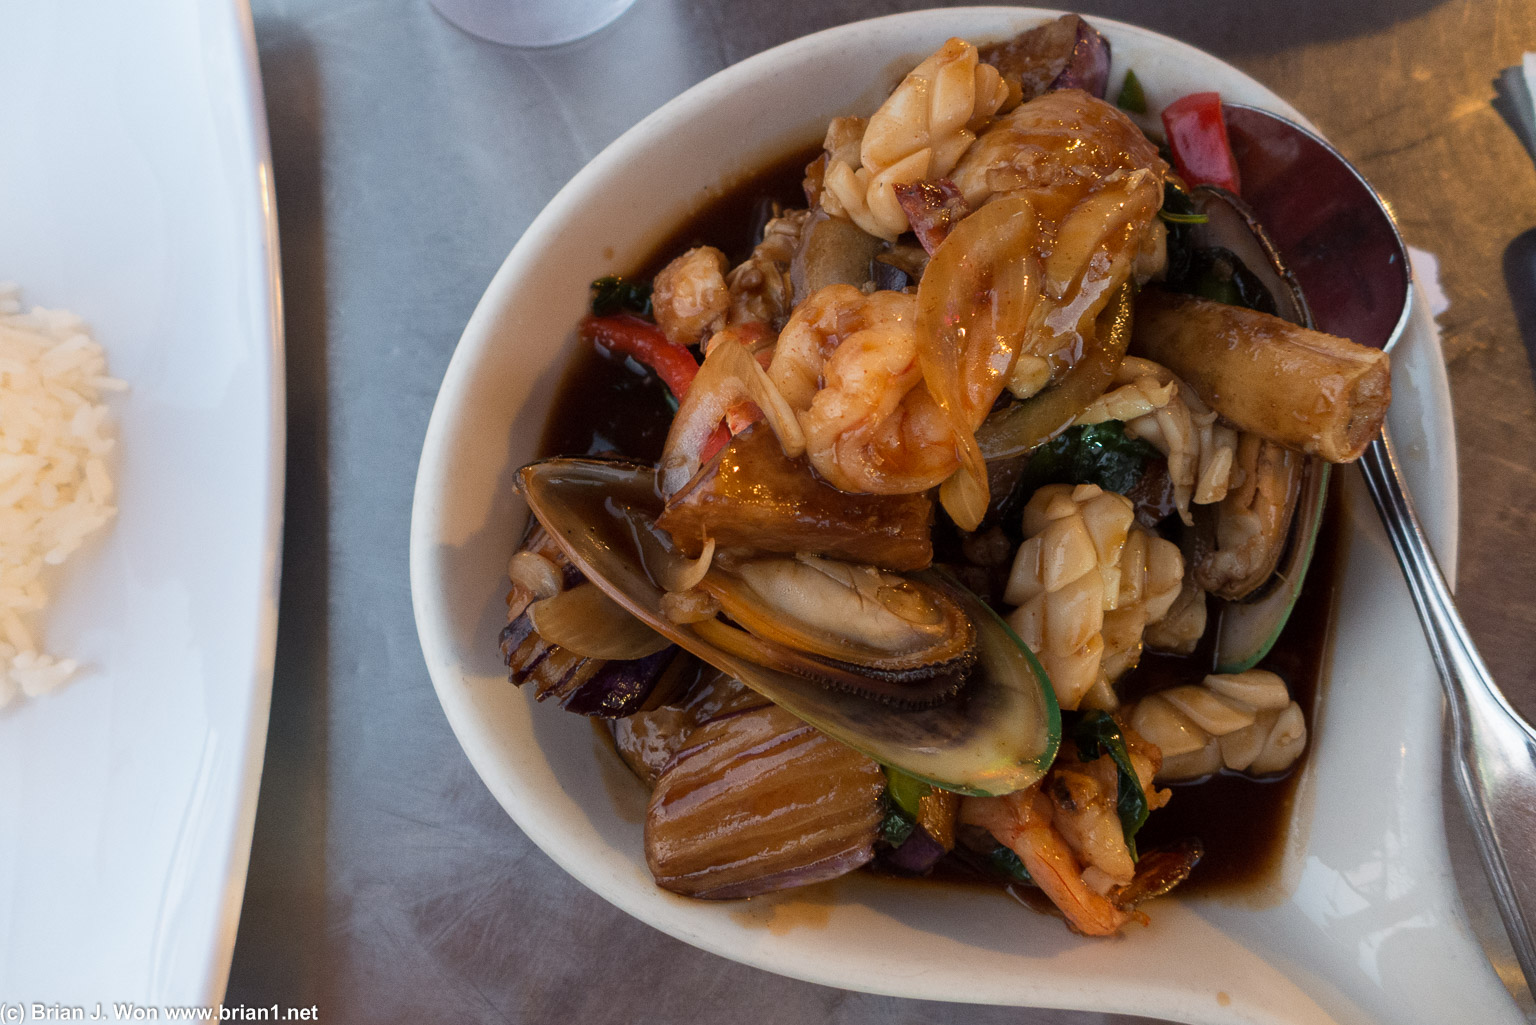 Seafood and eggplant wasn't bad. A little plain, just salty/a little sweet, not much else.